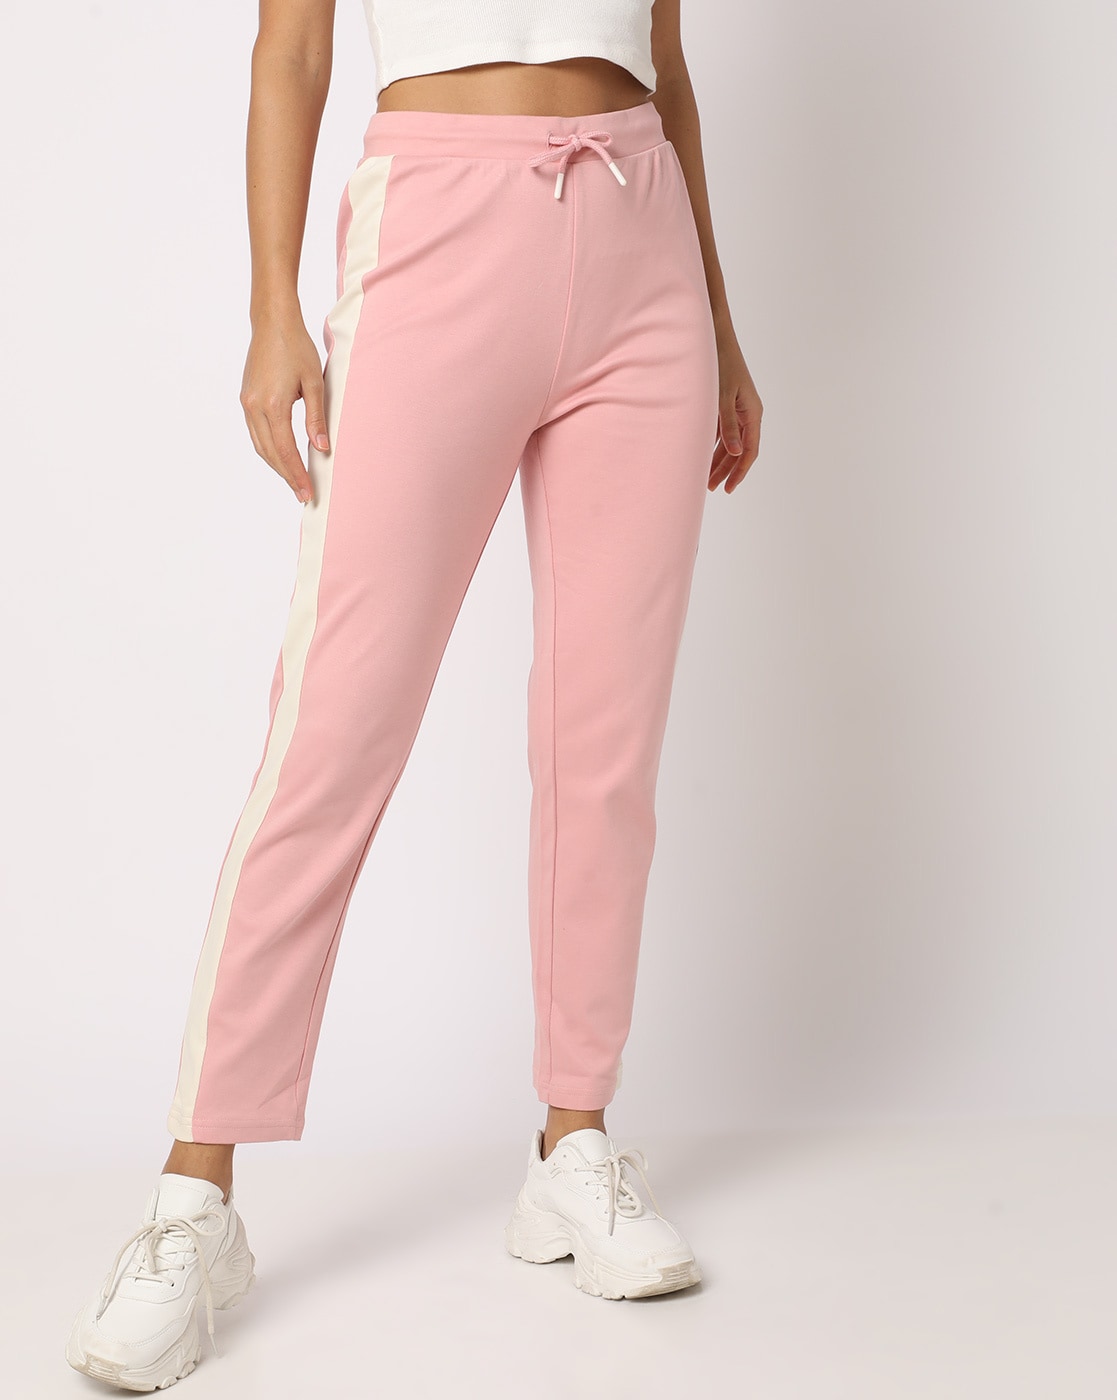 FANCY STRETCHABLE WOMEN TRACK PANT 106